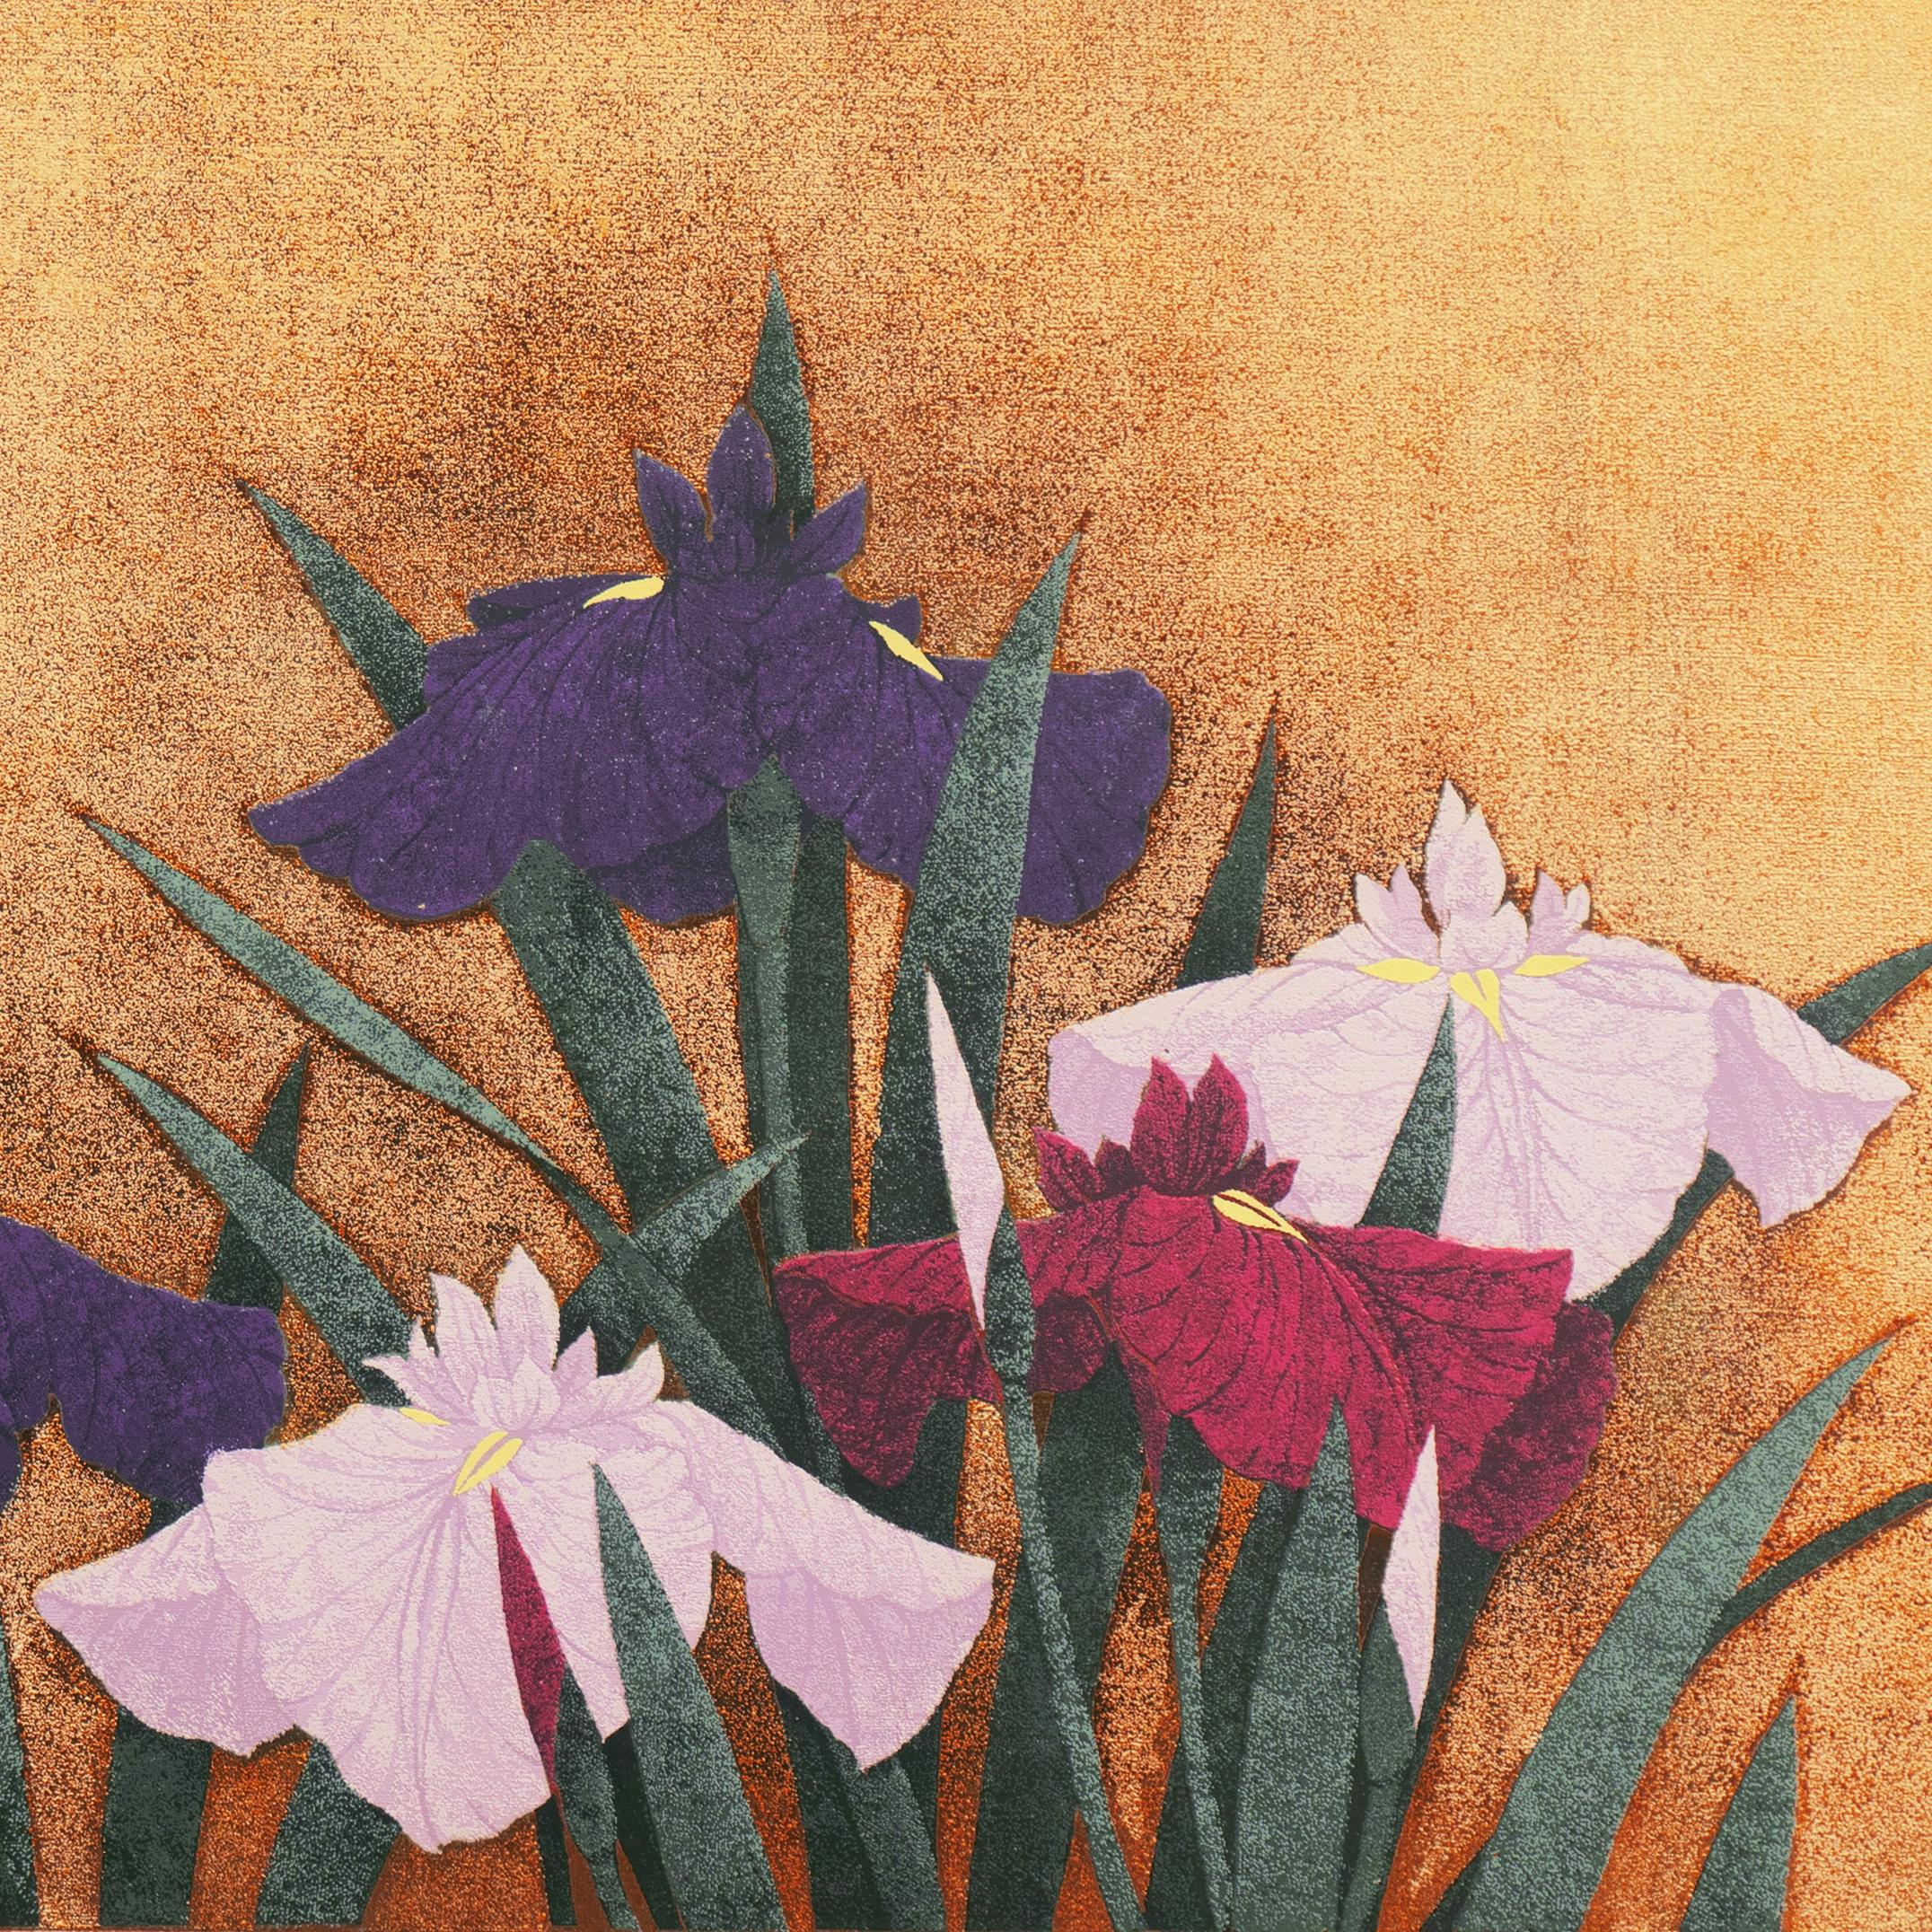 Signed lower right, in graphite, 'K. Suguira' for Kazutoshi Sugiura (Japanese, born 1938) and dated 1992. Titled lower left, in Kanji, 'Hanashōbu' (Japanese Iris) with number and limitation, '79/80'.  Sheet dimensions: 18.5 x 27 inches

Printmaker